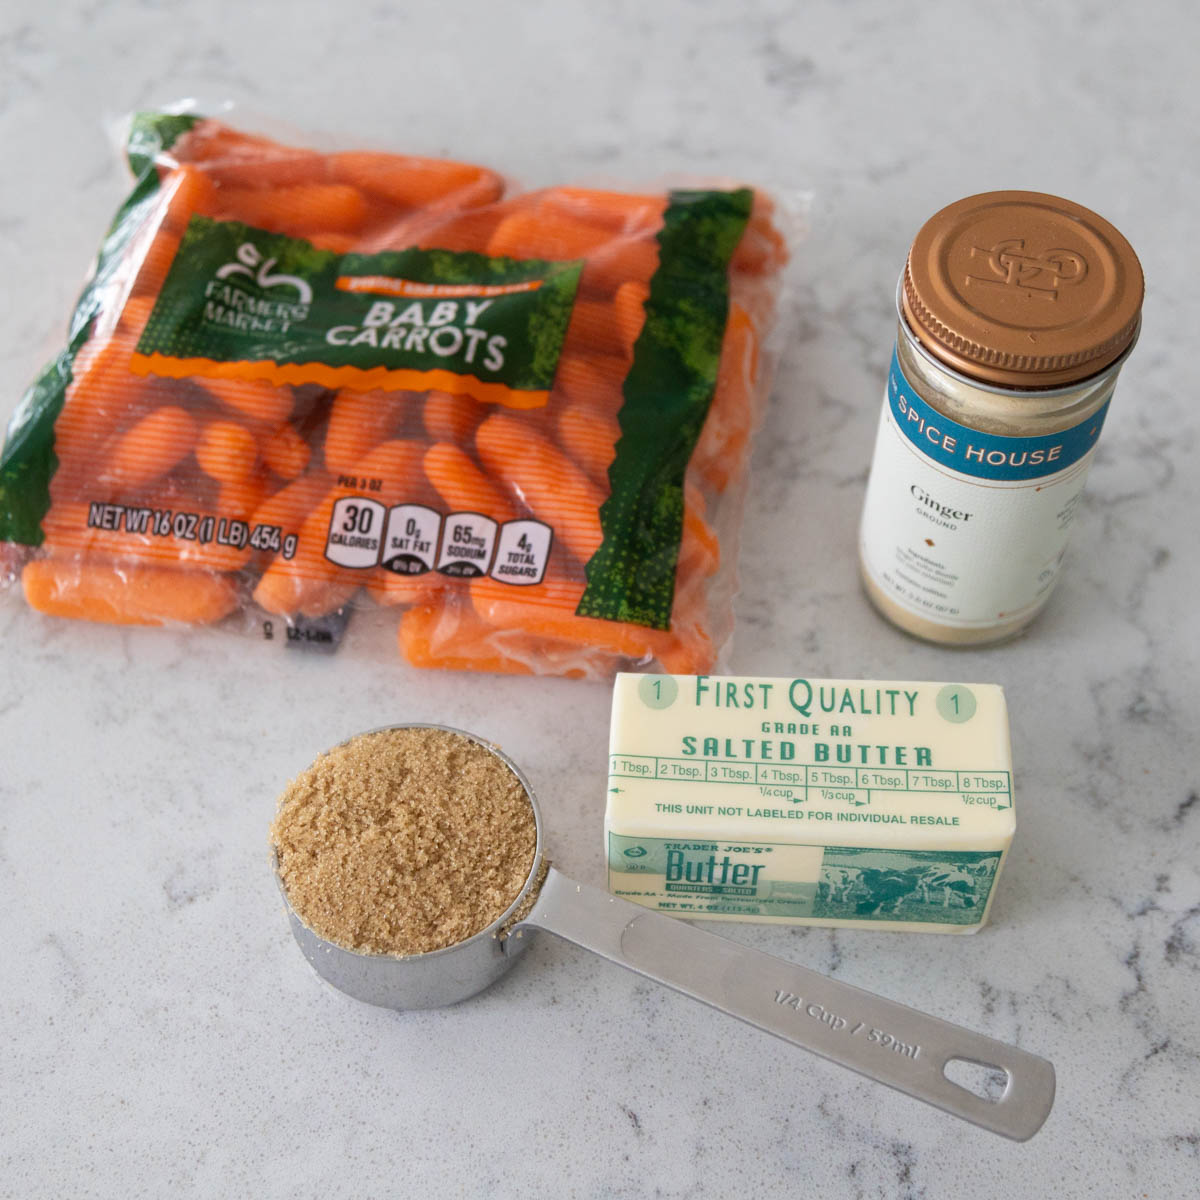 The bag of baby carrots sits next to the butter, brown sugar, and a jar of ginger.